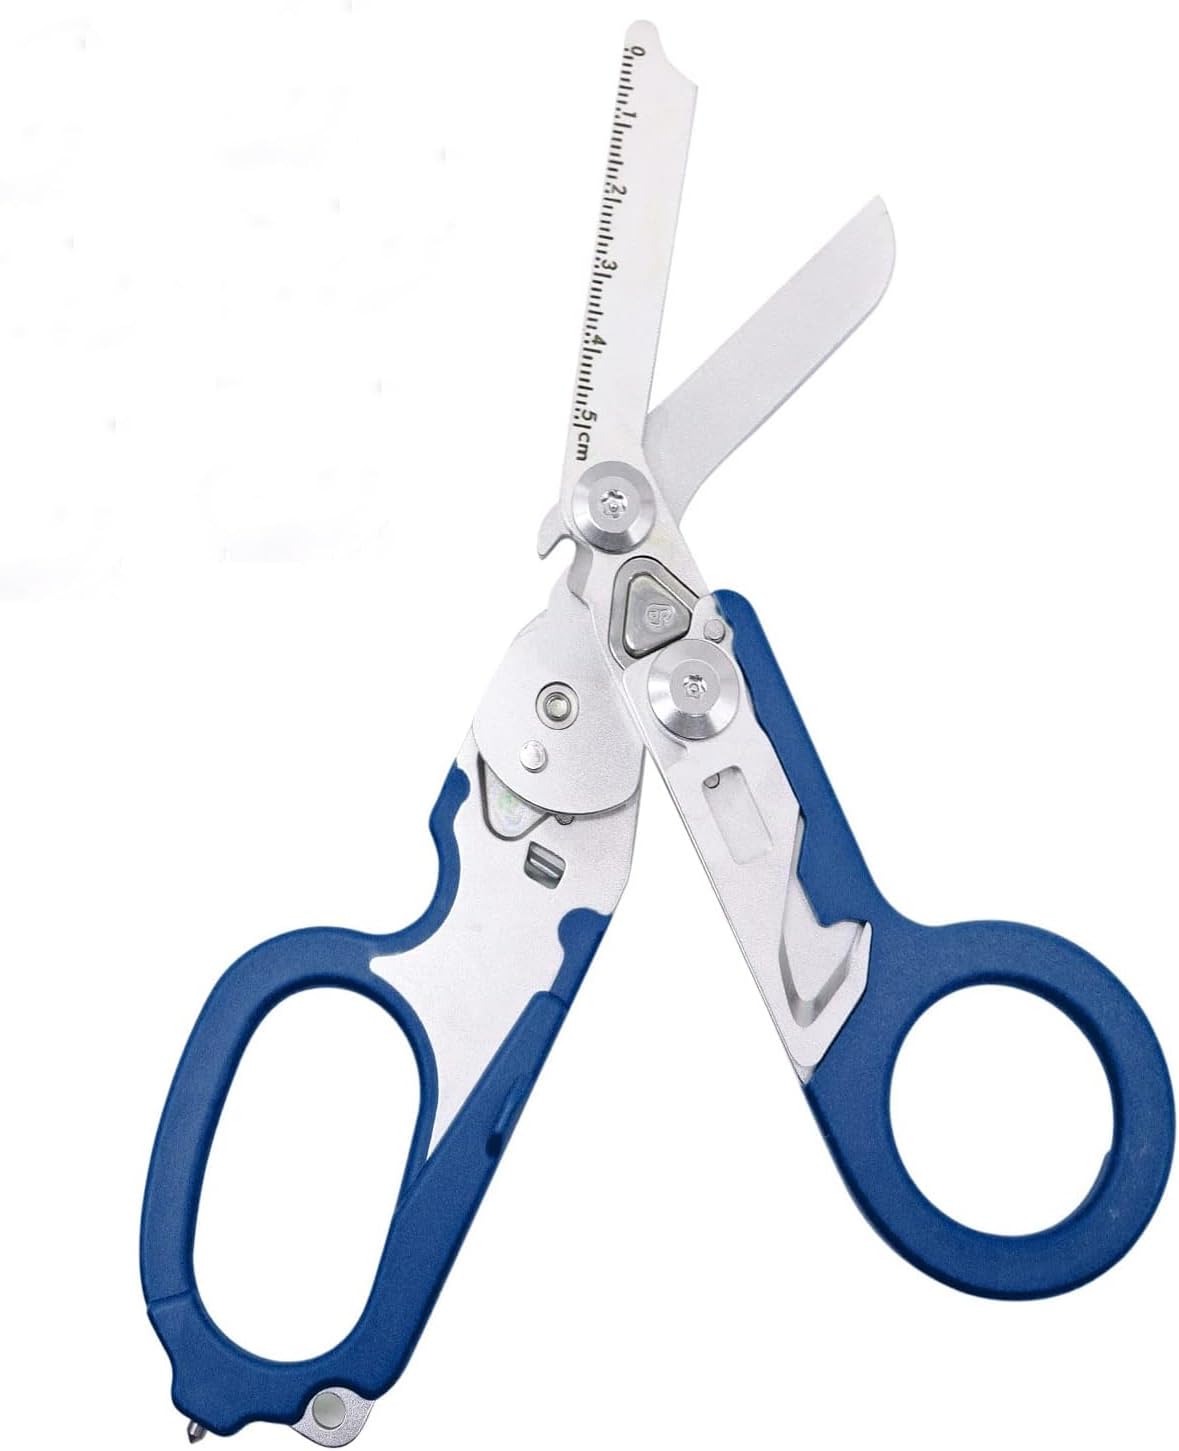 frmingzhaoEmergency Shears with Strap Cutter and Glass Breaker